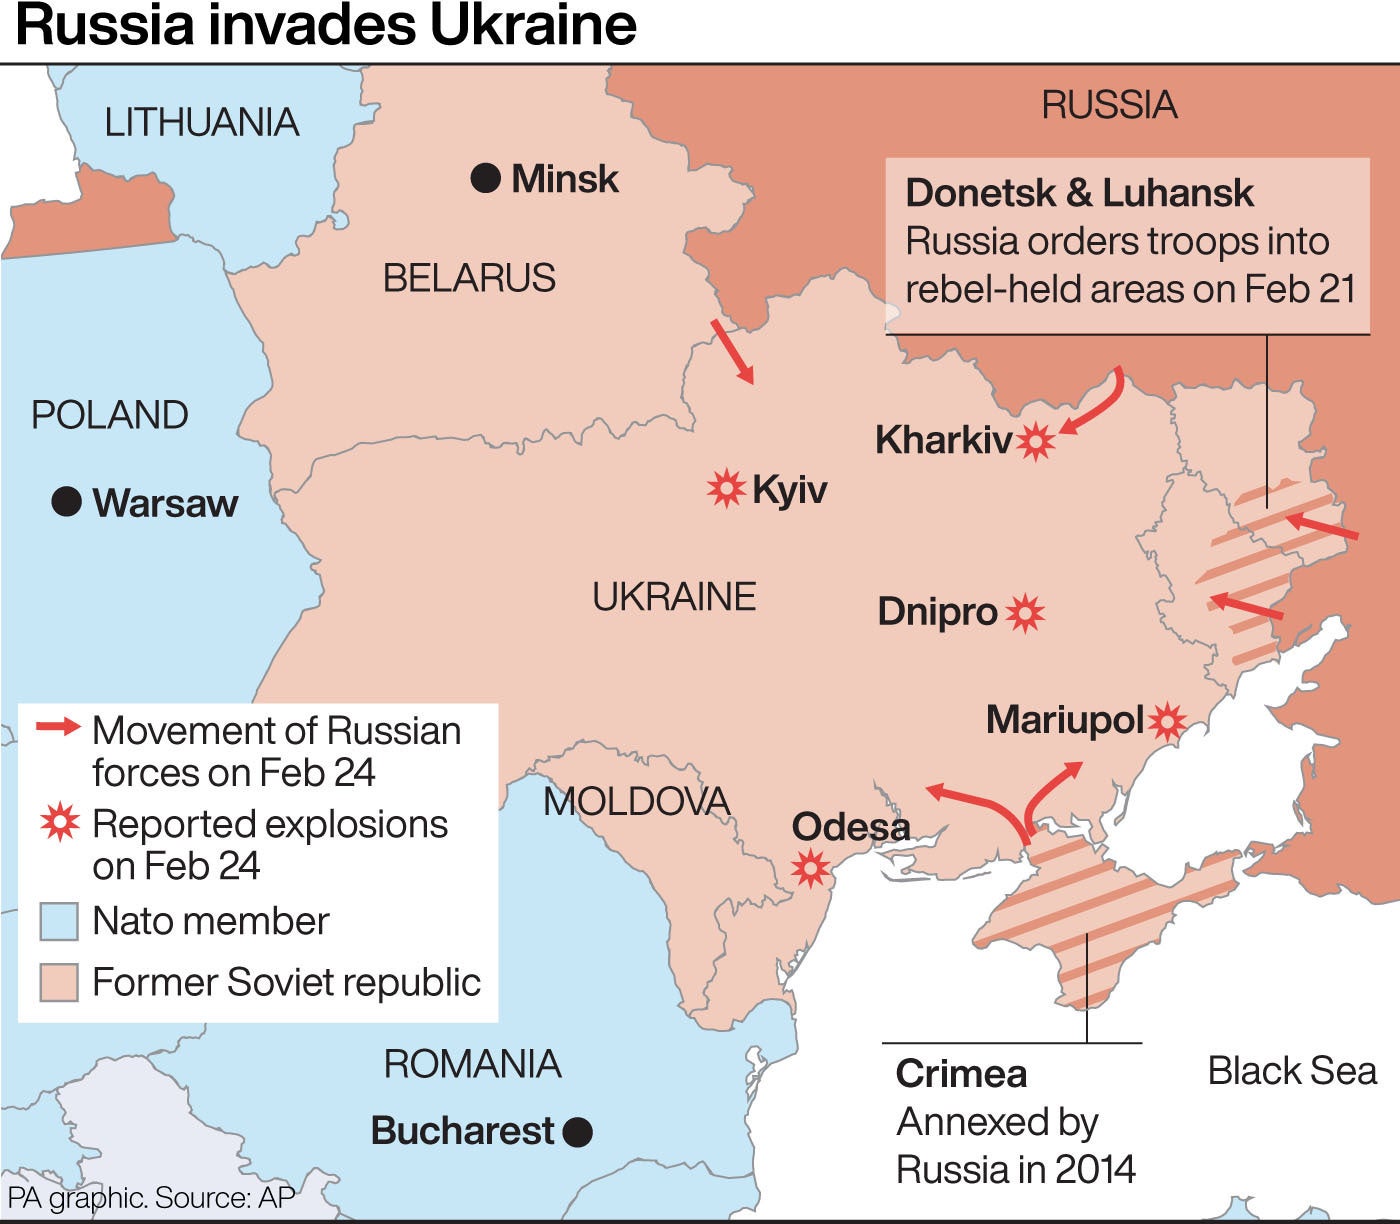 Russian troop movements and reported explosions in Ukraine